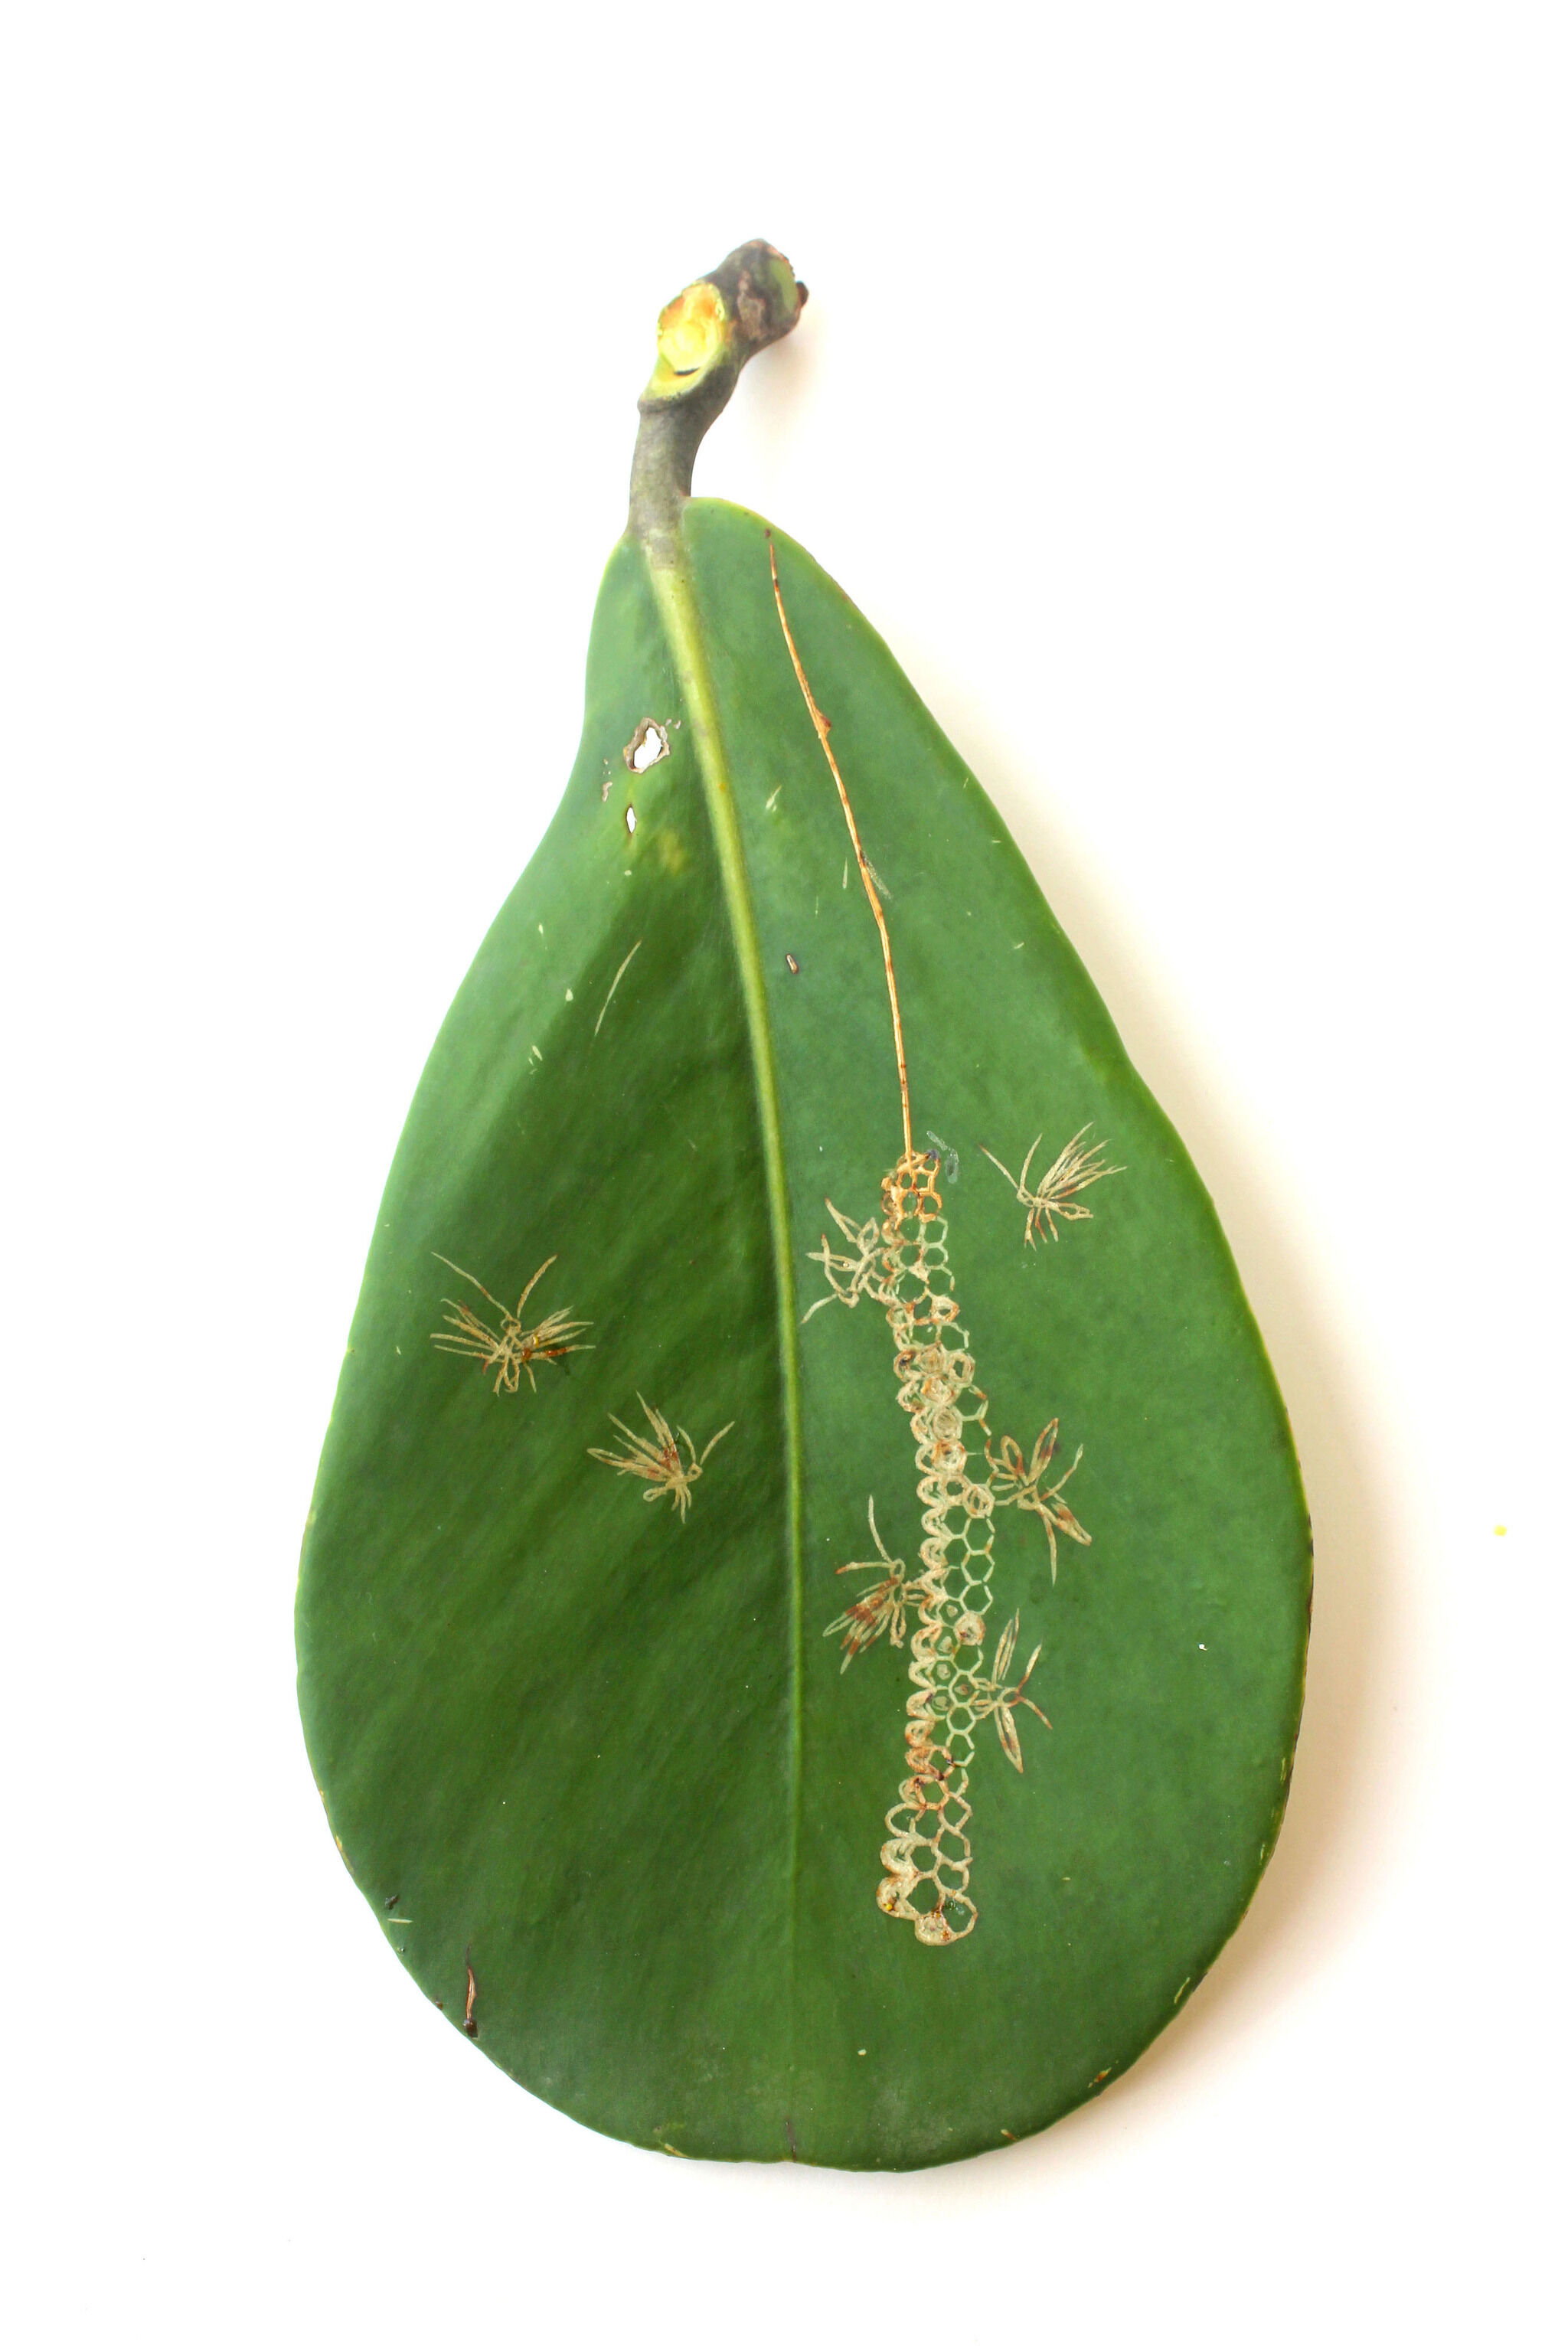 A green leaf with a sketch that resembles wasps flying and feeding on a fruit spike.